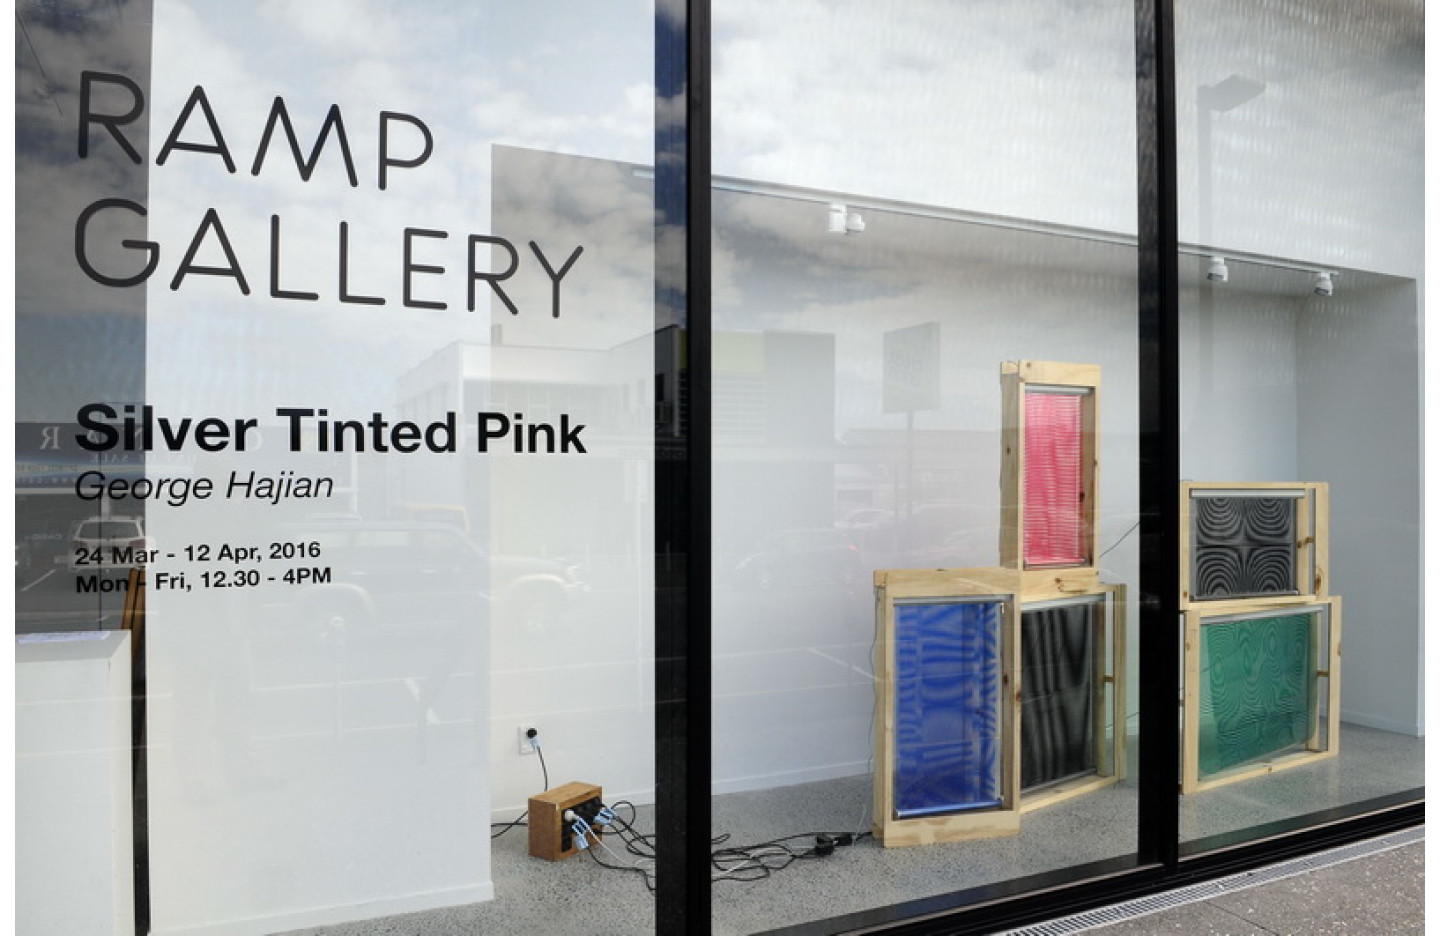 Silver Tinted Pink, Ramp Gallery (2016)